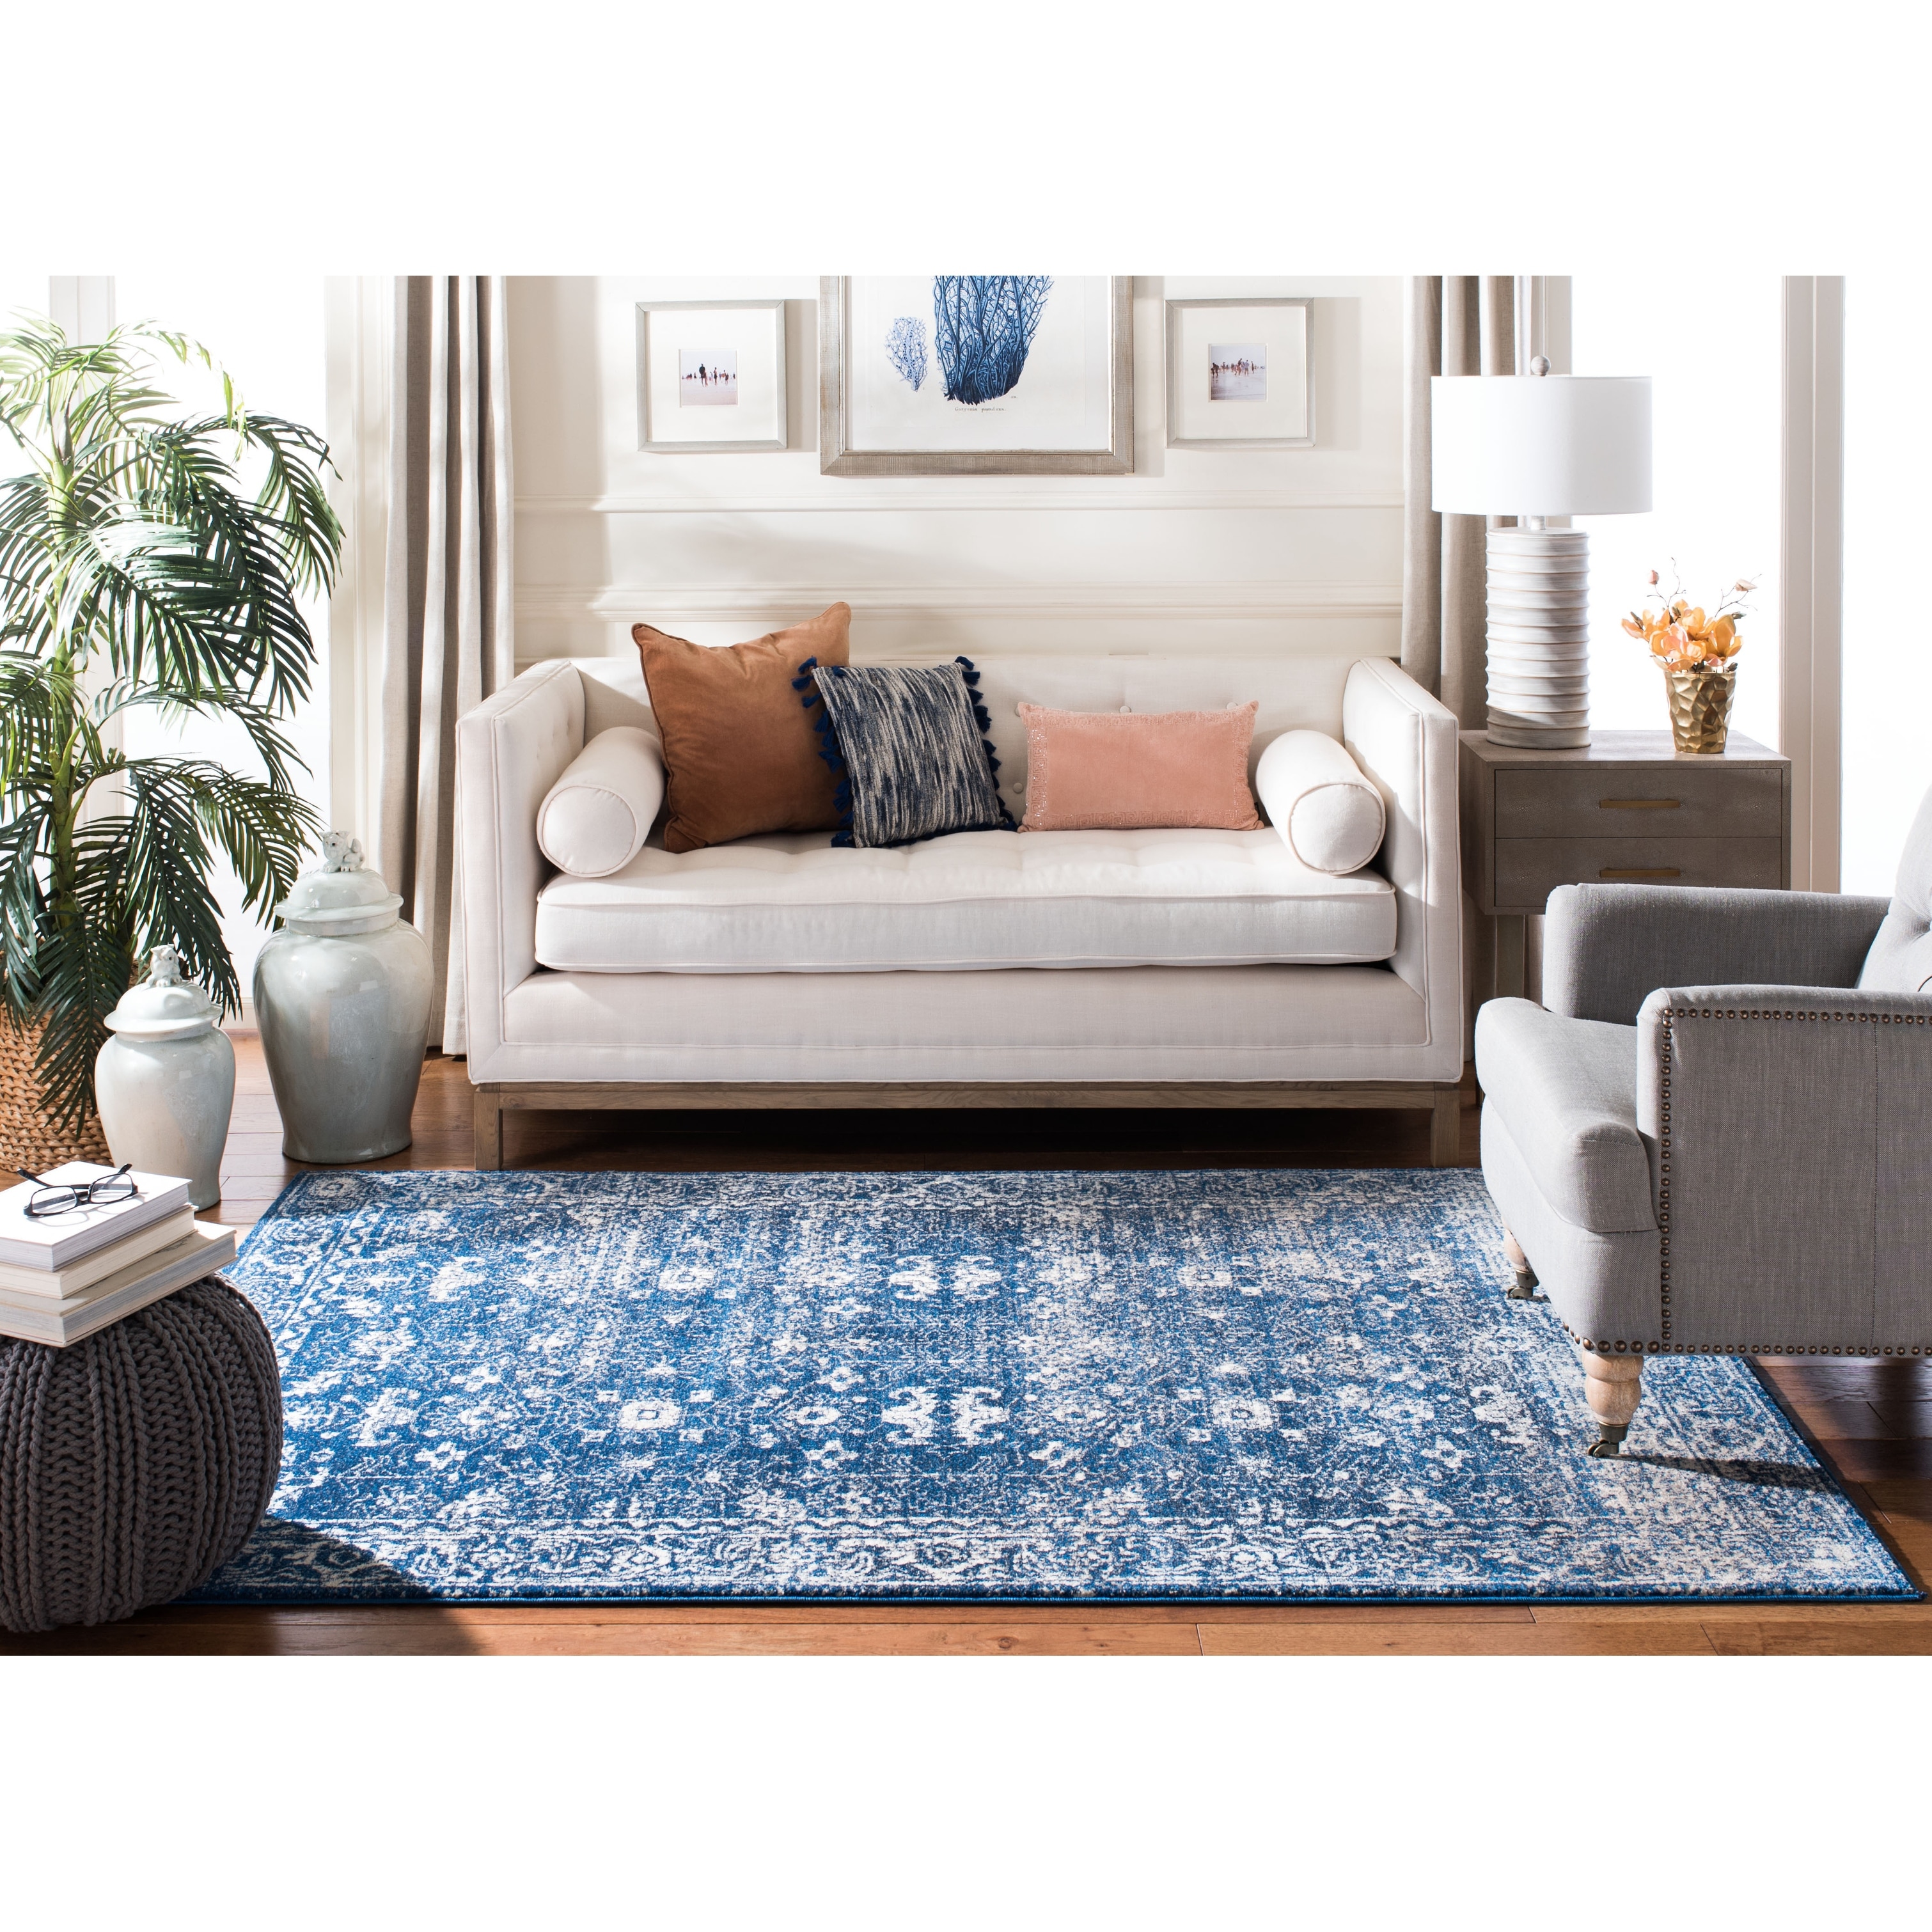 SAFAVIEH Evoke Collection EVK288N Oriental Medallion Distressed Non-Shedding Dining Room Entryway Foyer Living Room Bedroom Area Rug Navy 6'7 x 6'7 Round Grey 